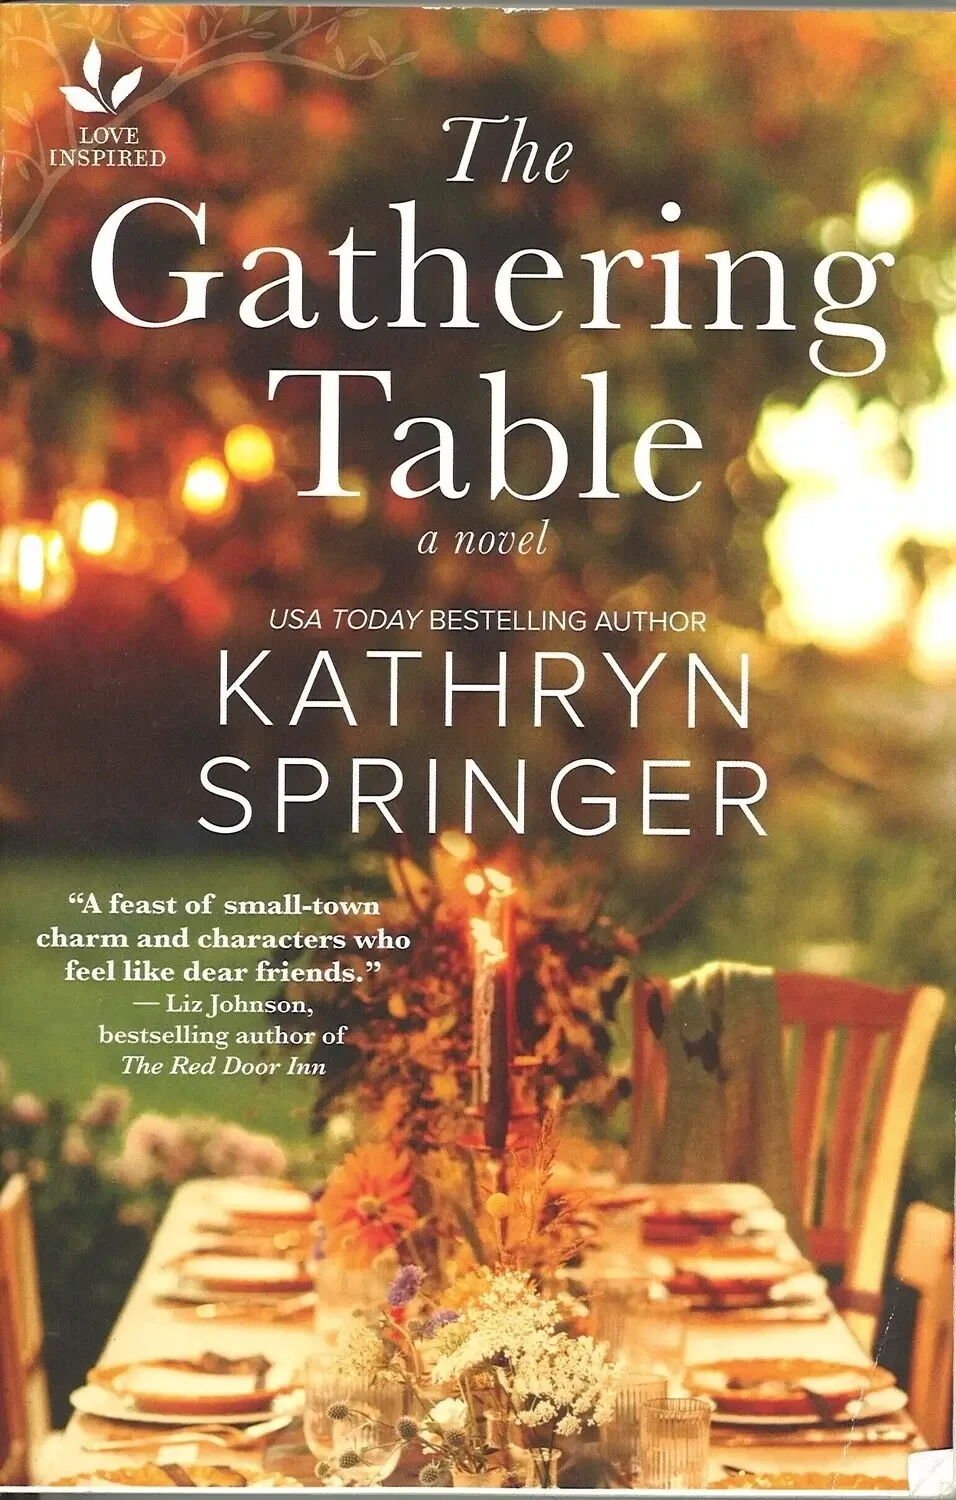 The Gathering Table by Kathryn Springer